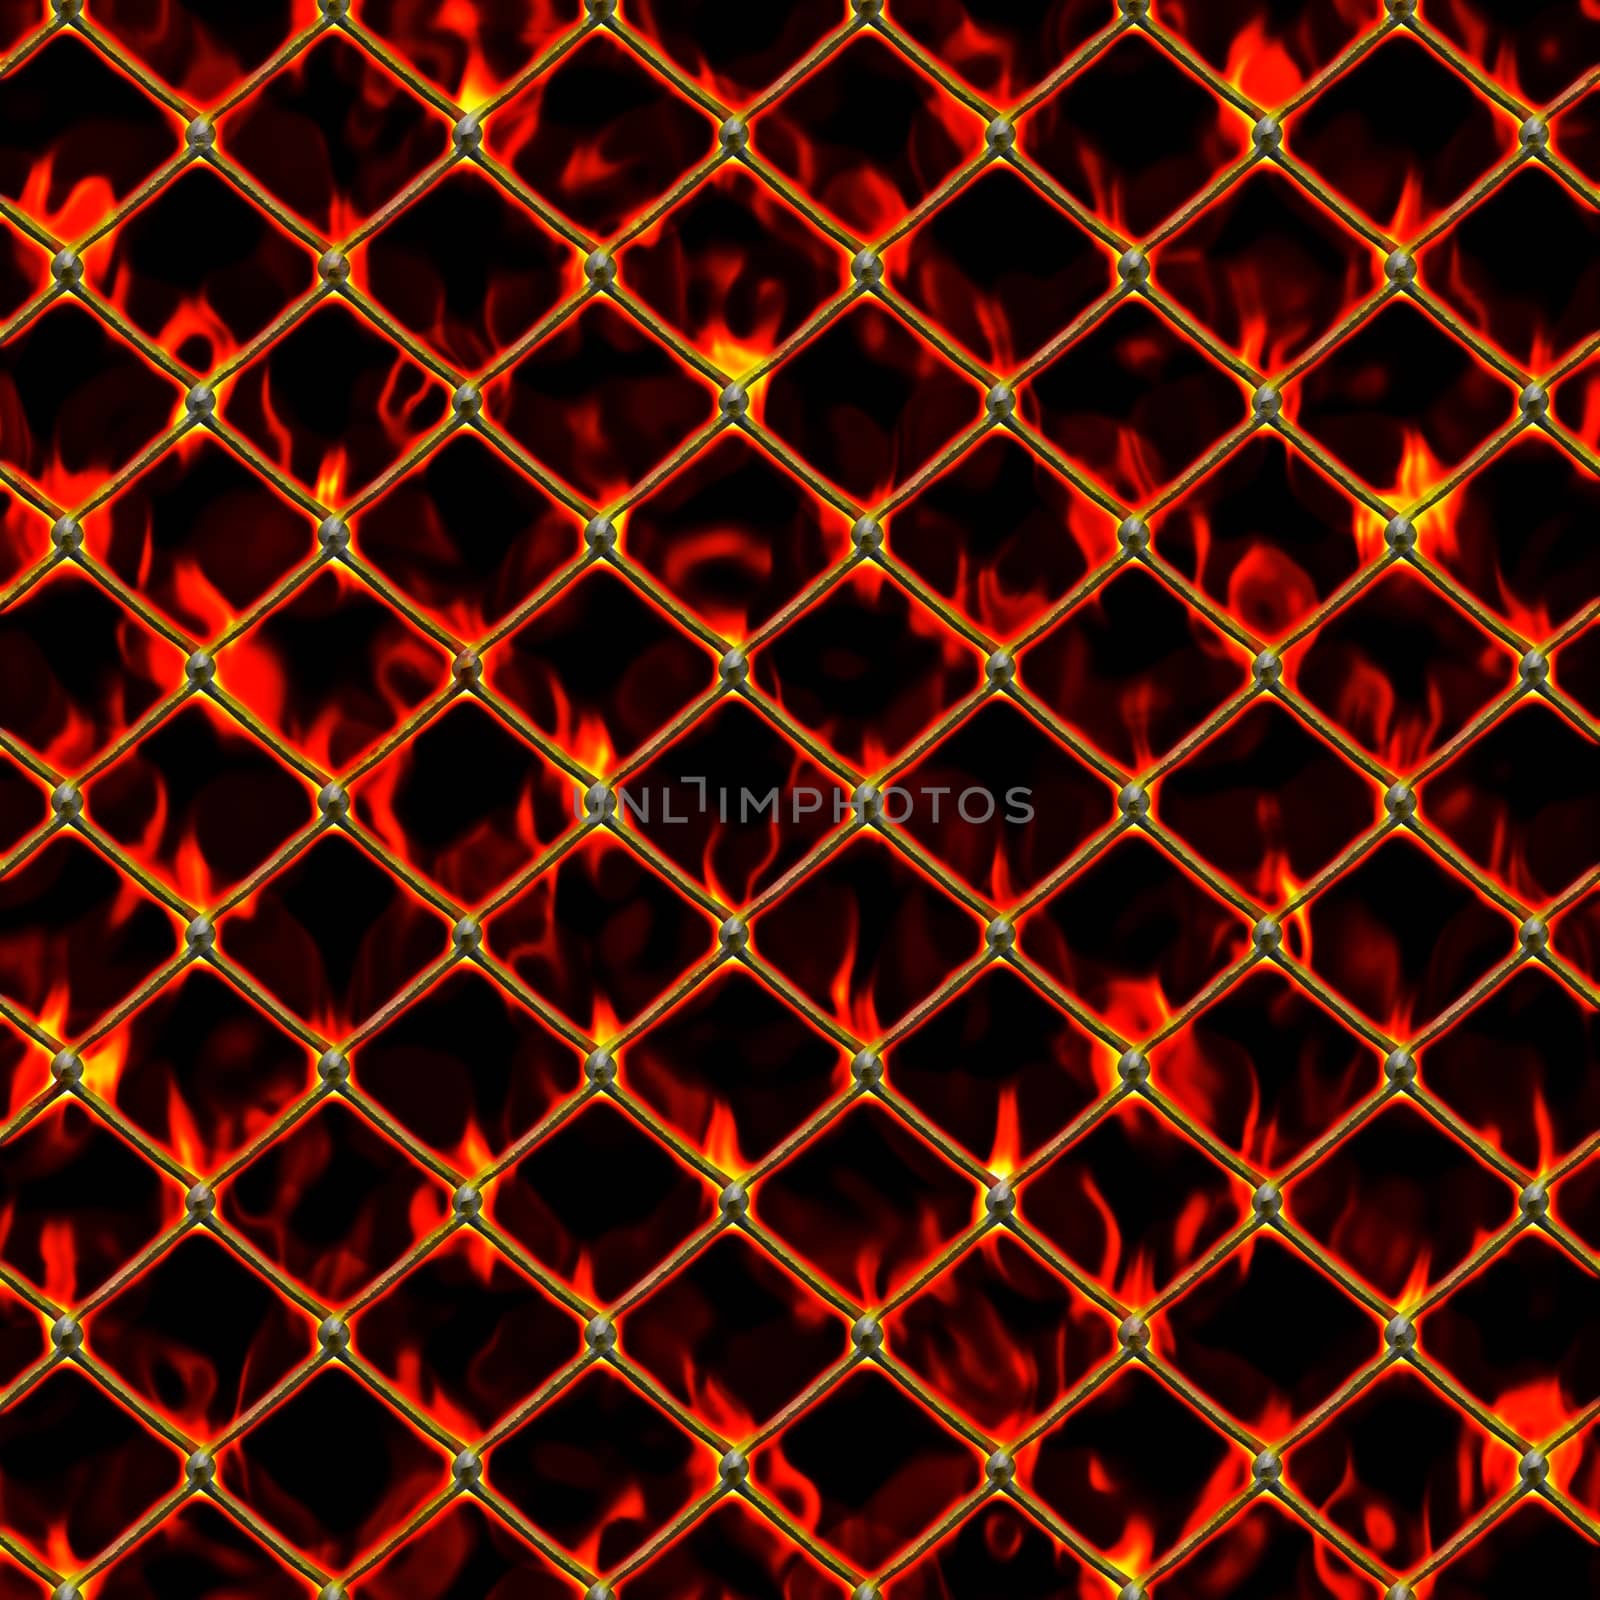 An illustration of a Burning Chain Link